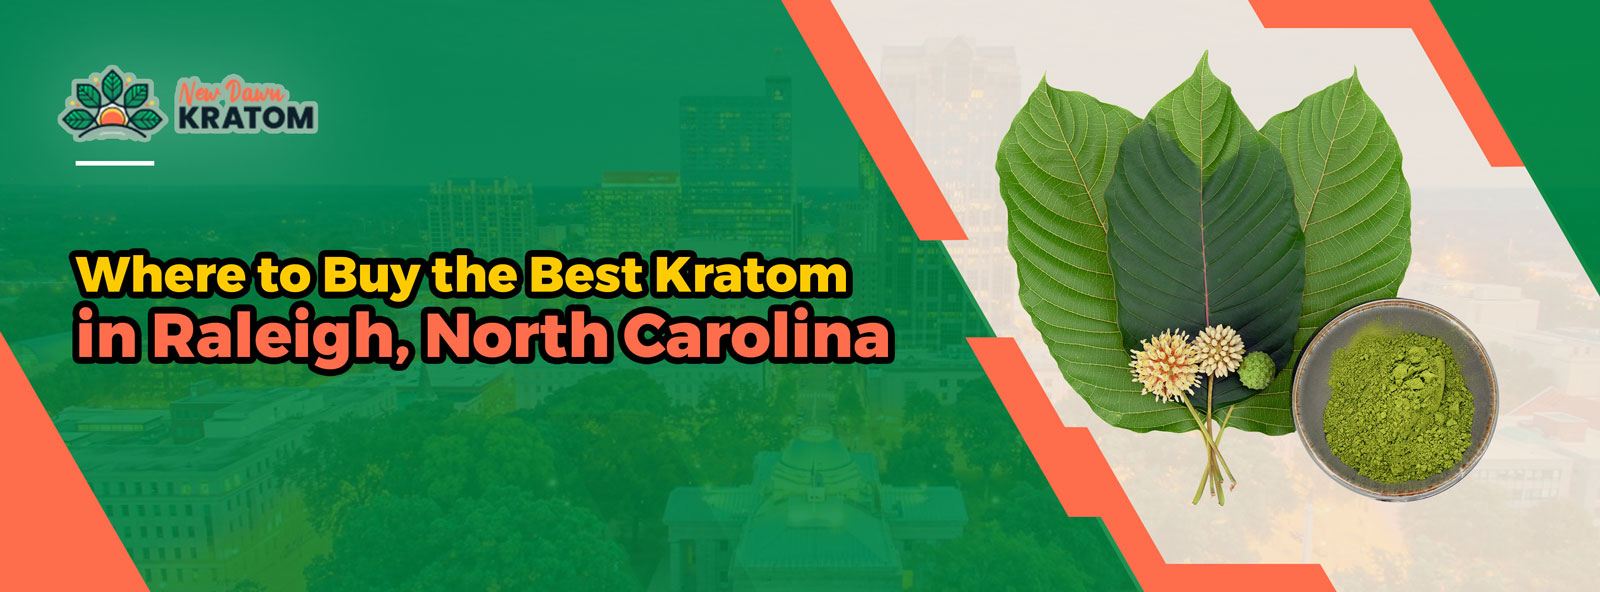 Where to Buy the Best Kratom in Raleigh, North Carolina